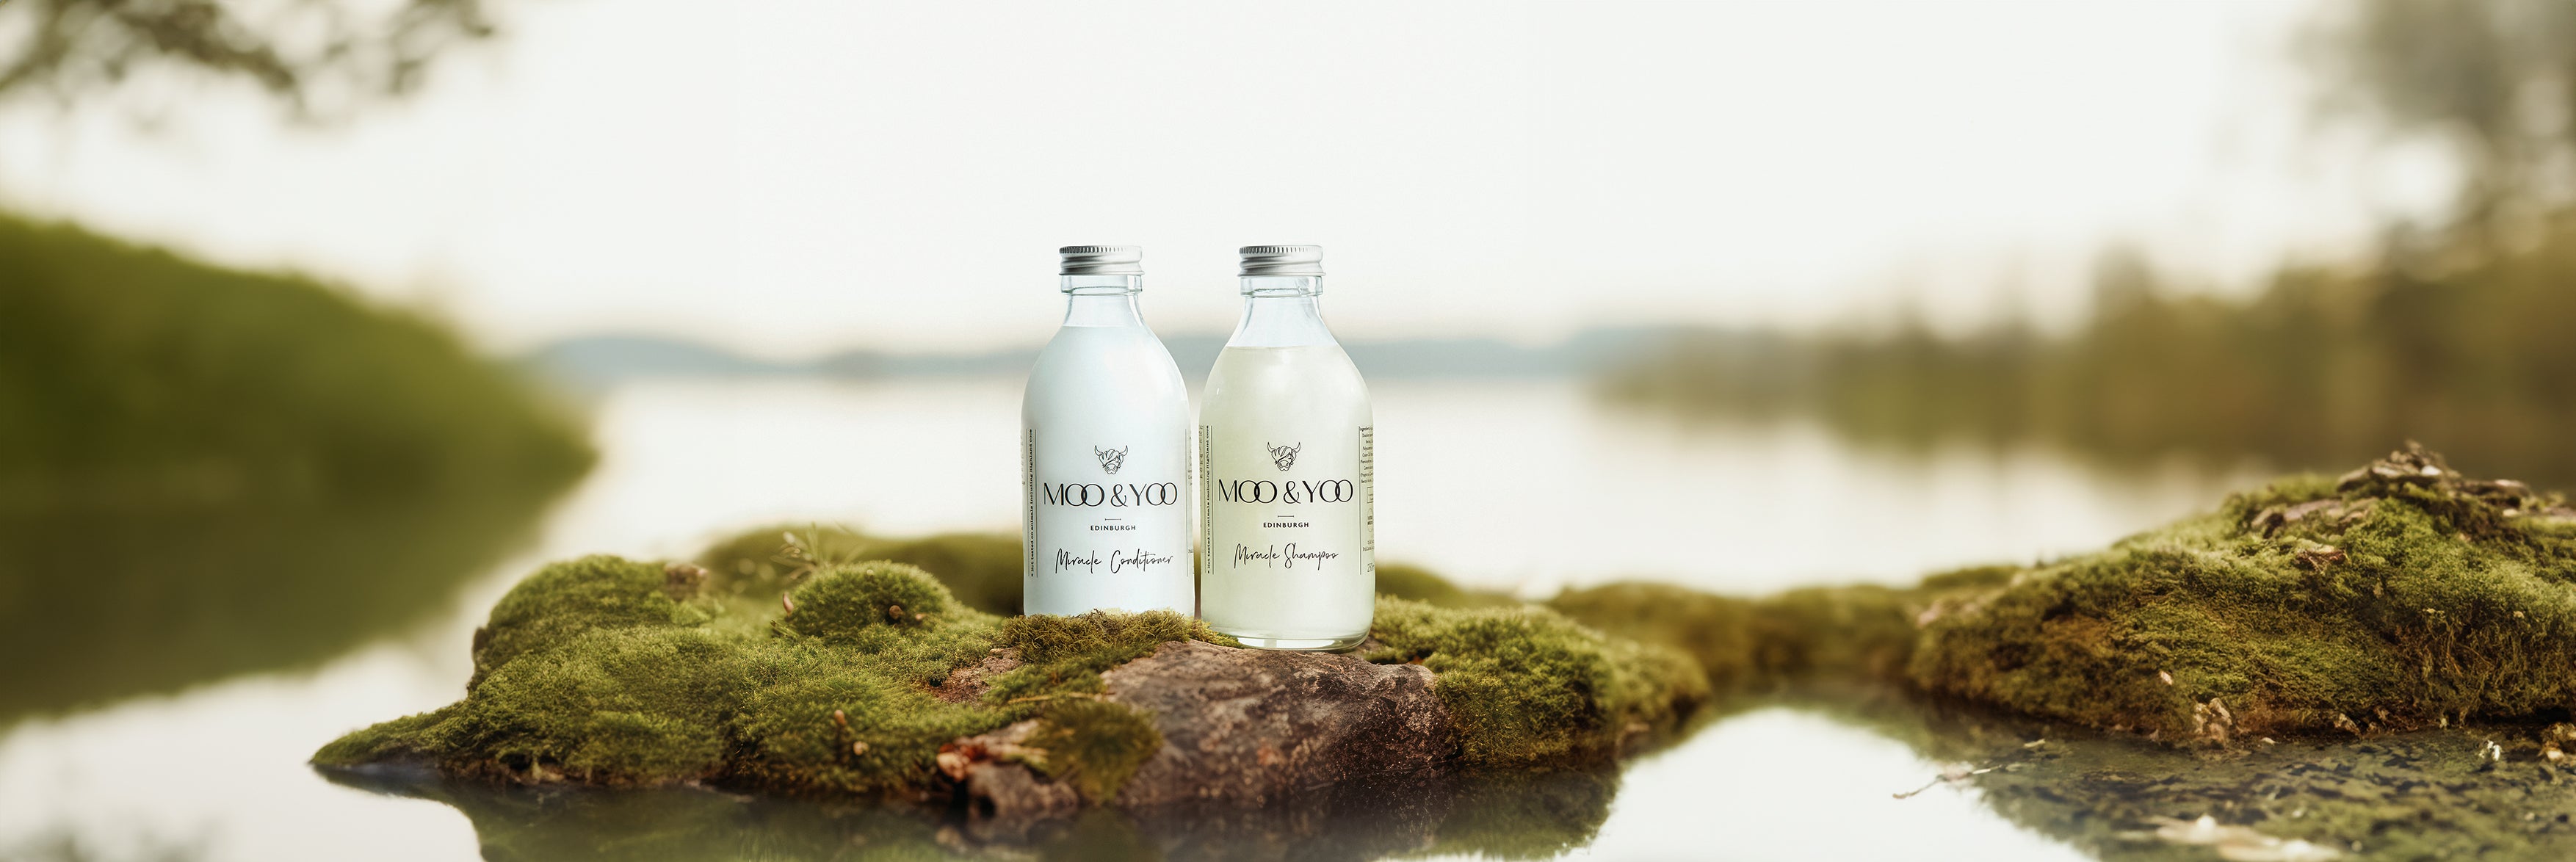 Our rituals duo of shampoo and conditioner in glass bottles on a moss island in the middle of a lake 